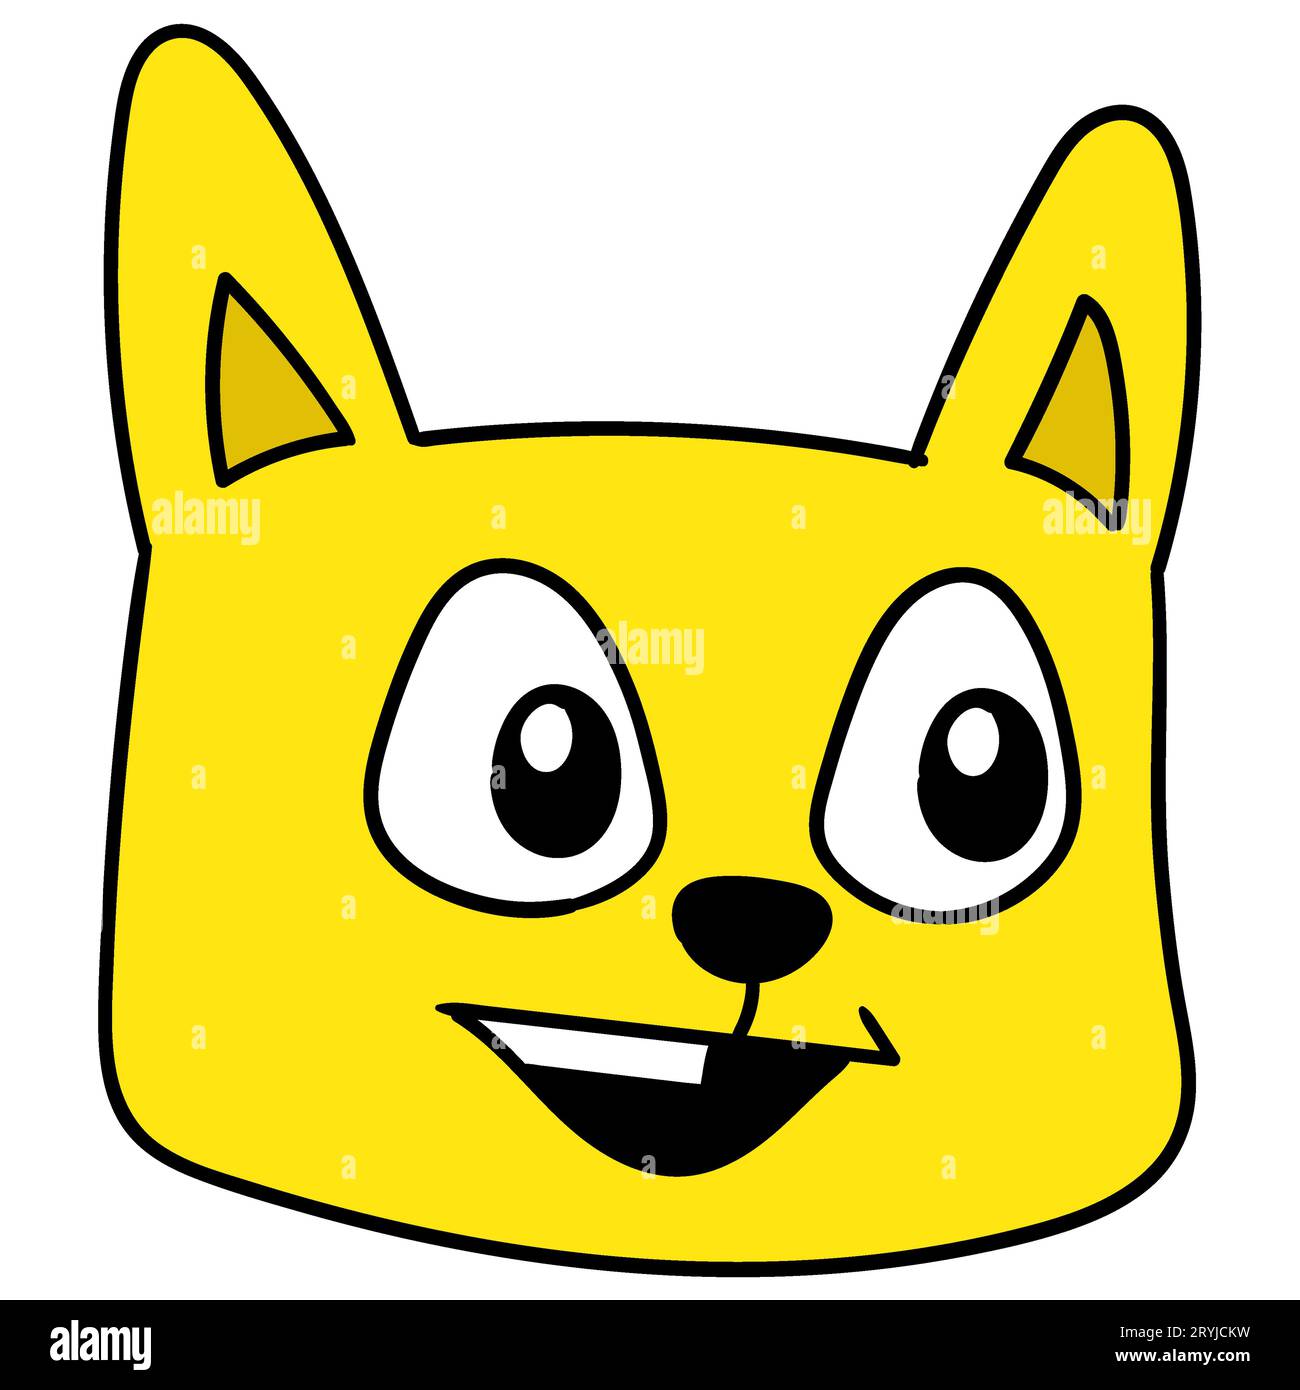 yellow cat head is smiling cutely, vector illustration carton emoticon. doodle icon drawing Stock Photo